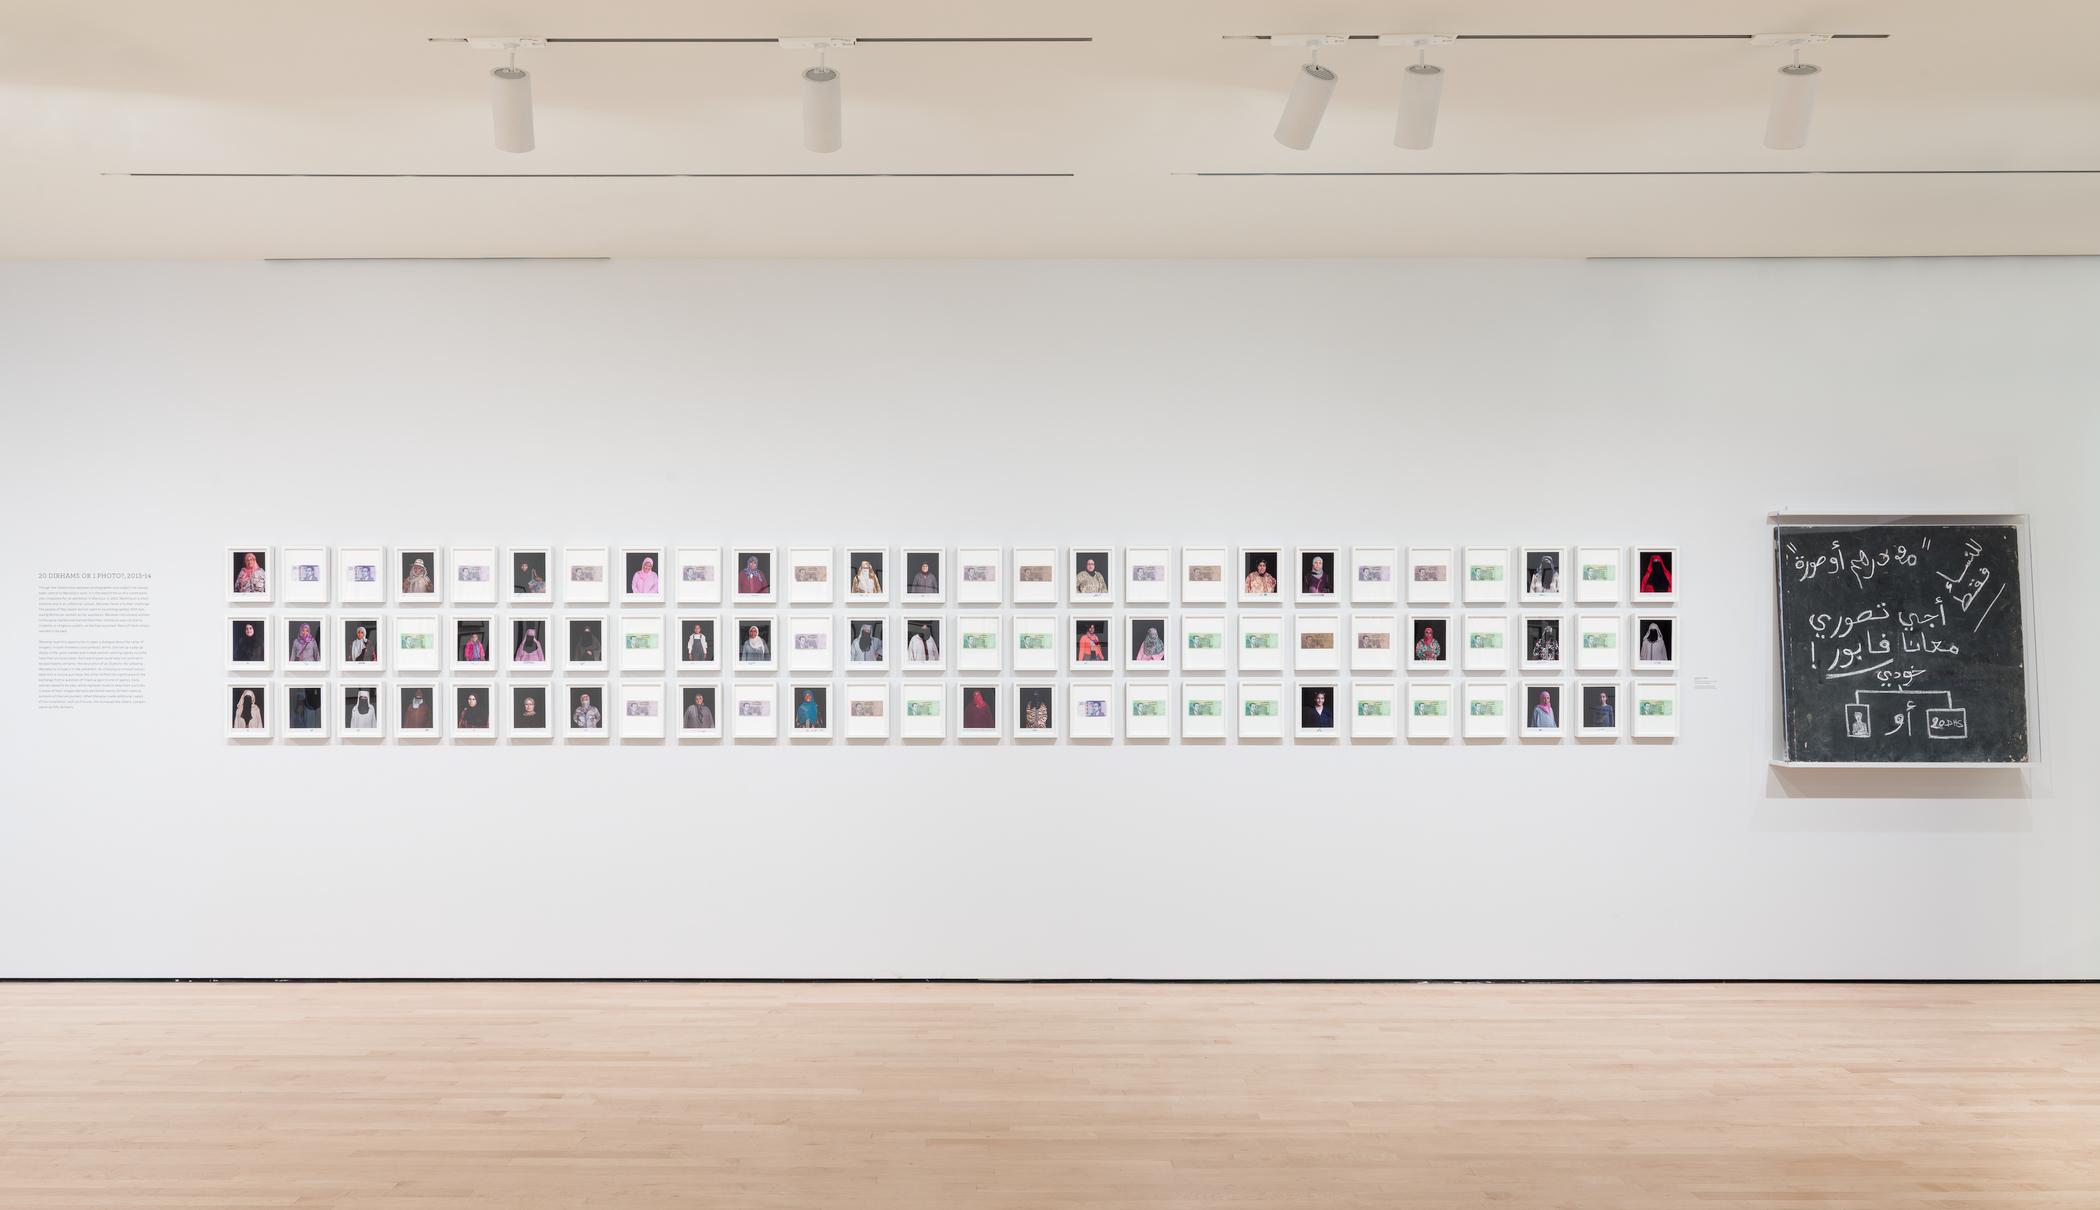 20 Dirhams or 1 photo? - Installation view of '20 dirhams or 1 photo?' at...